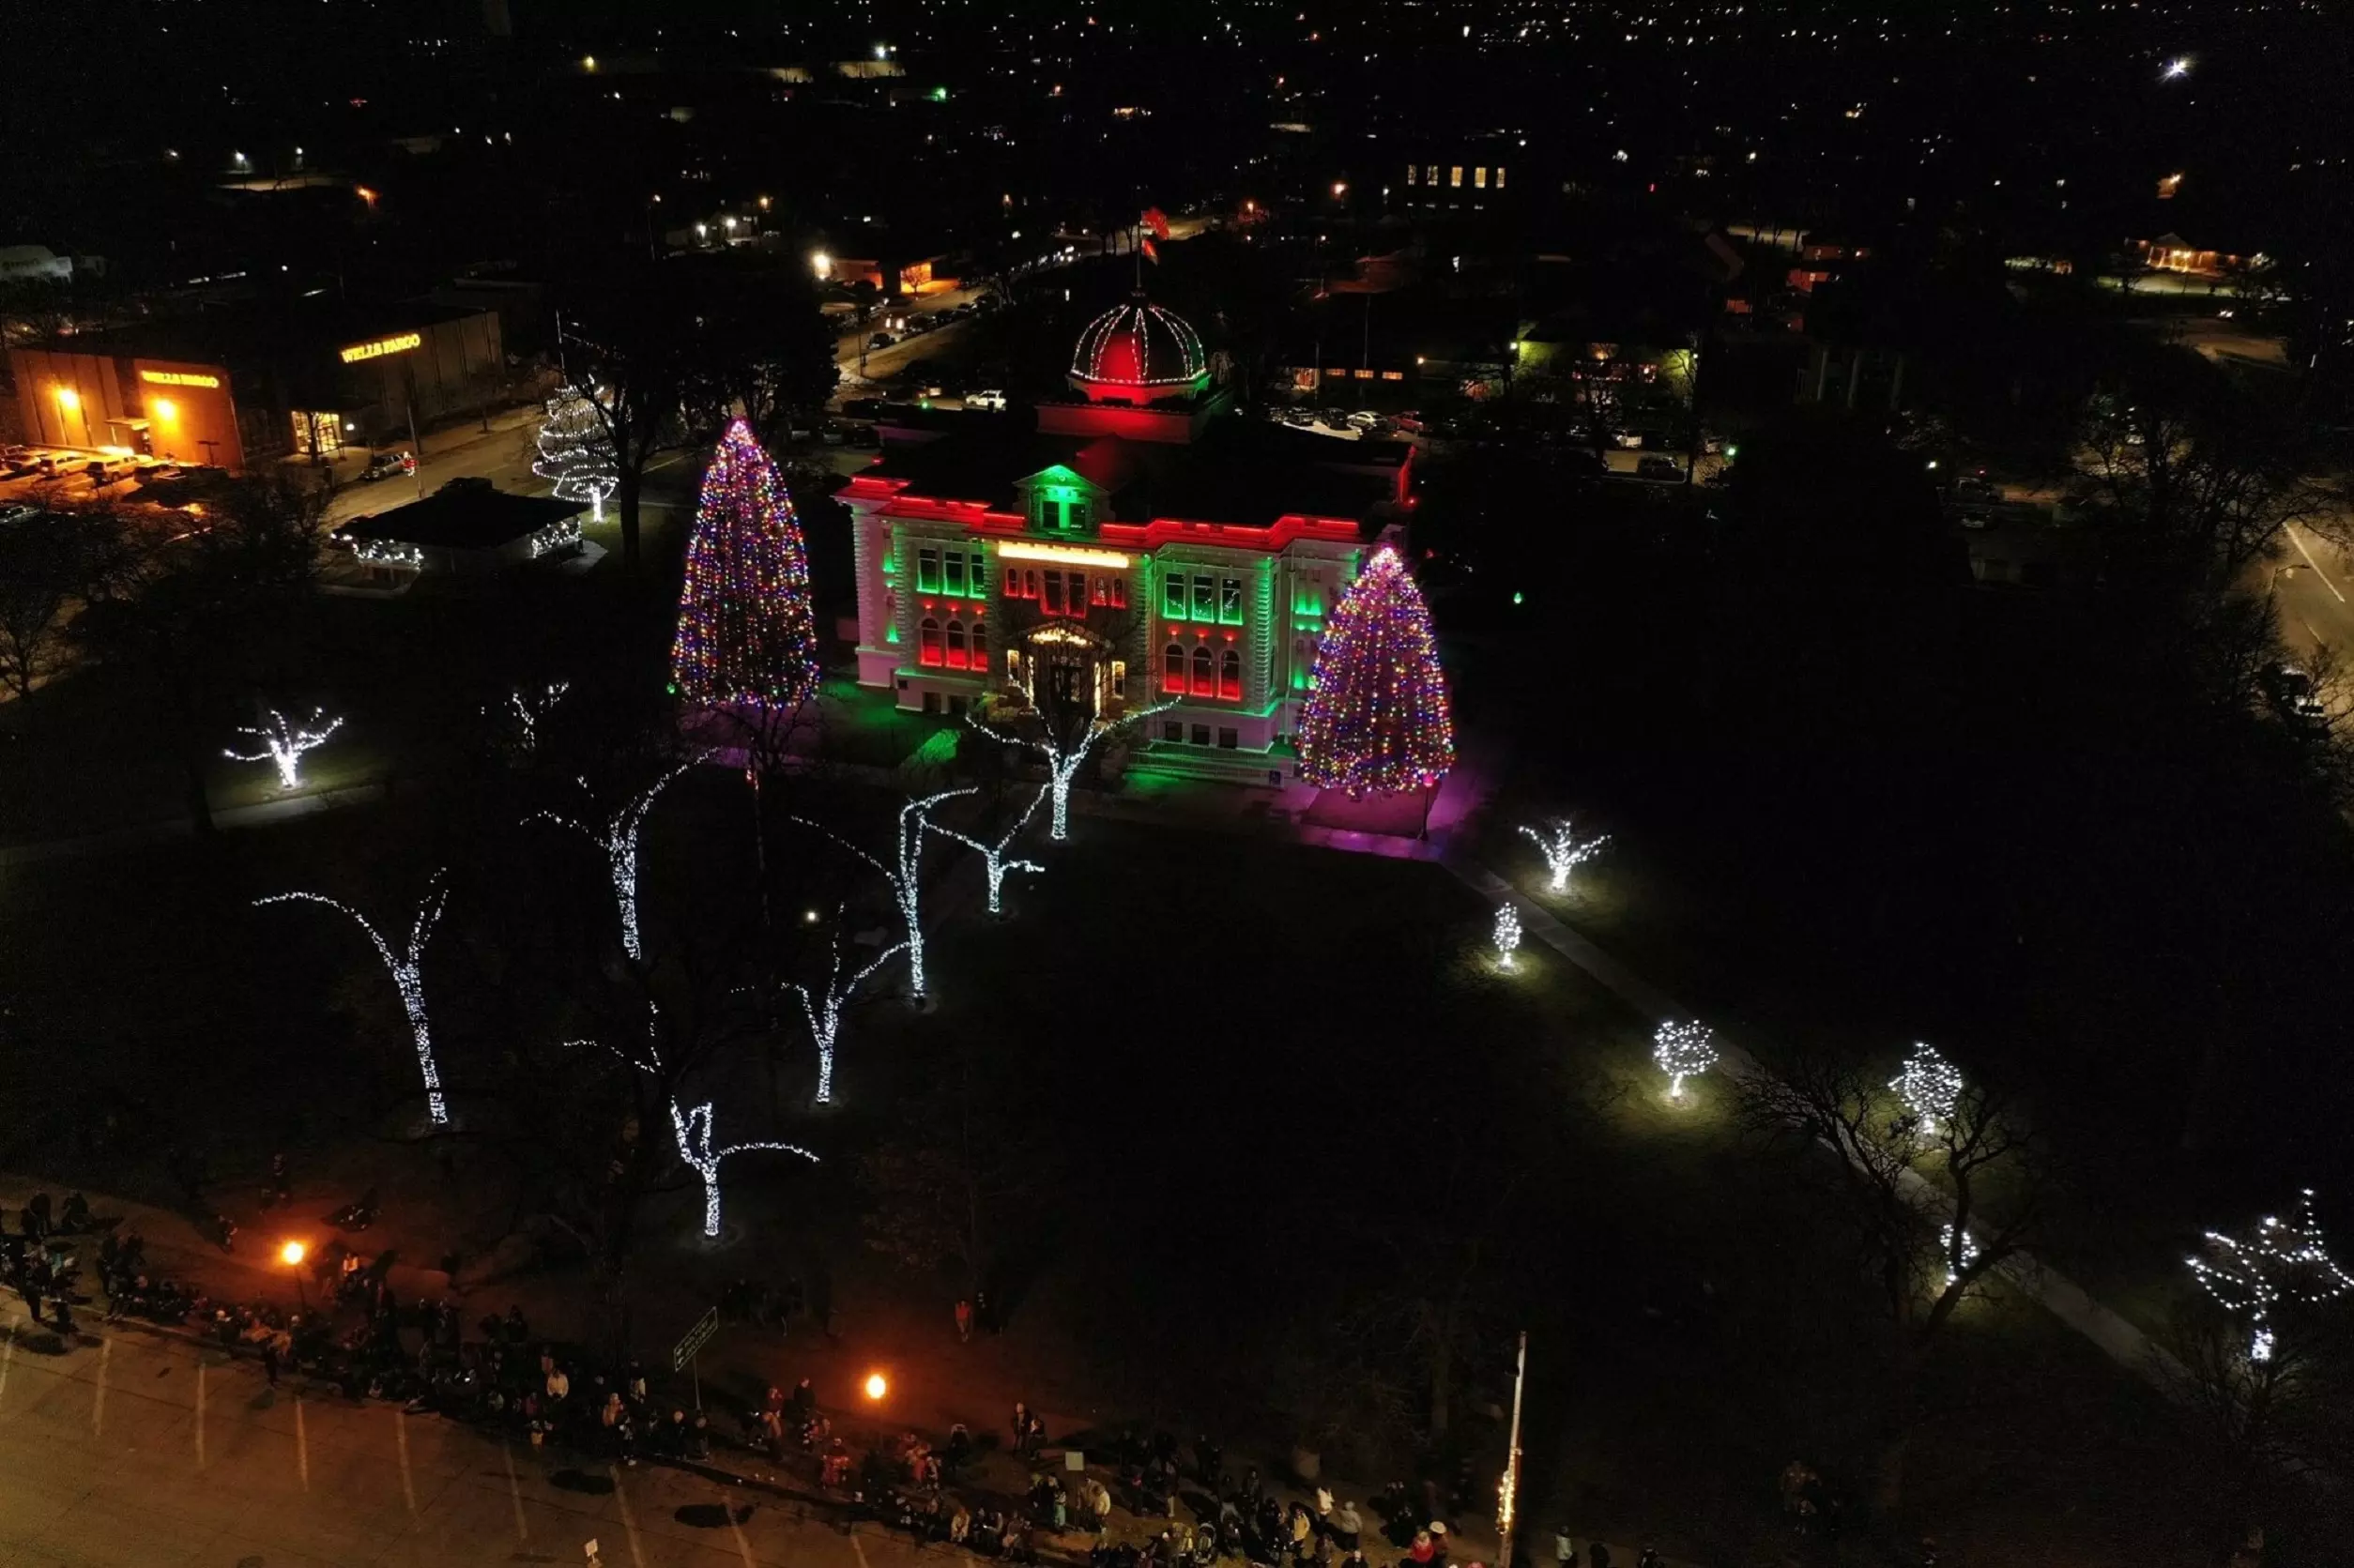 Logan County Courthouse Christmas Lights from the Air